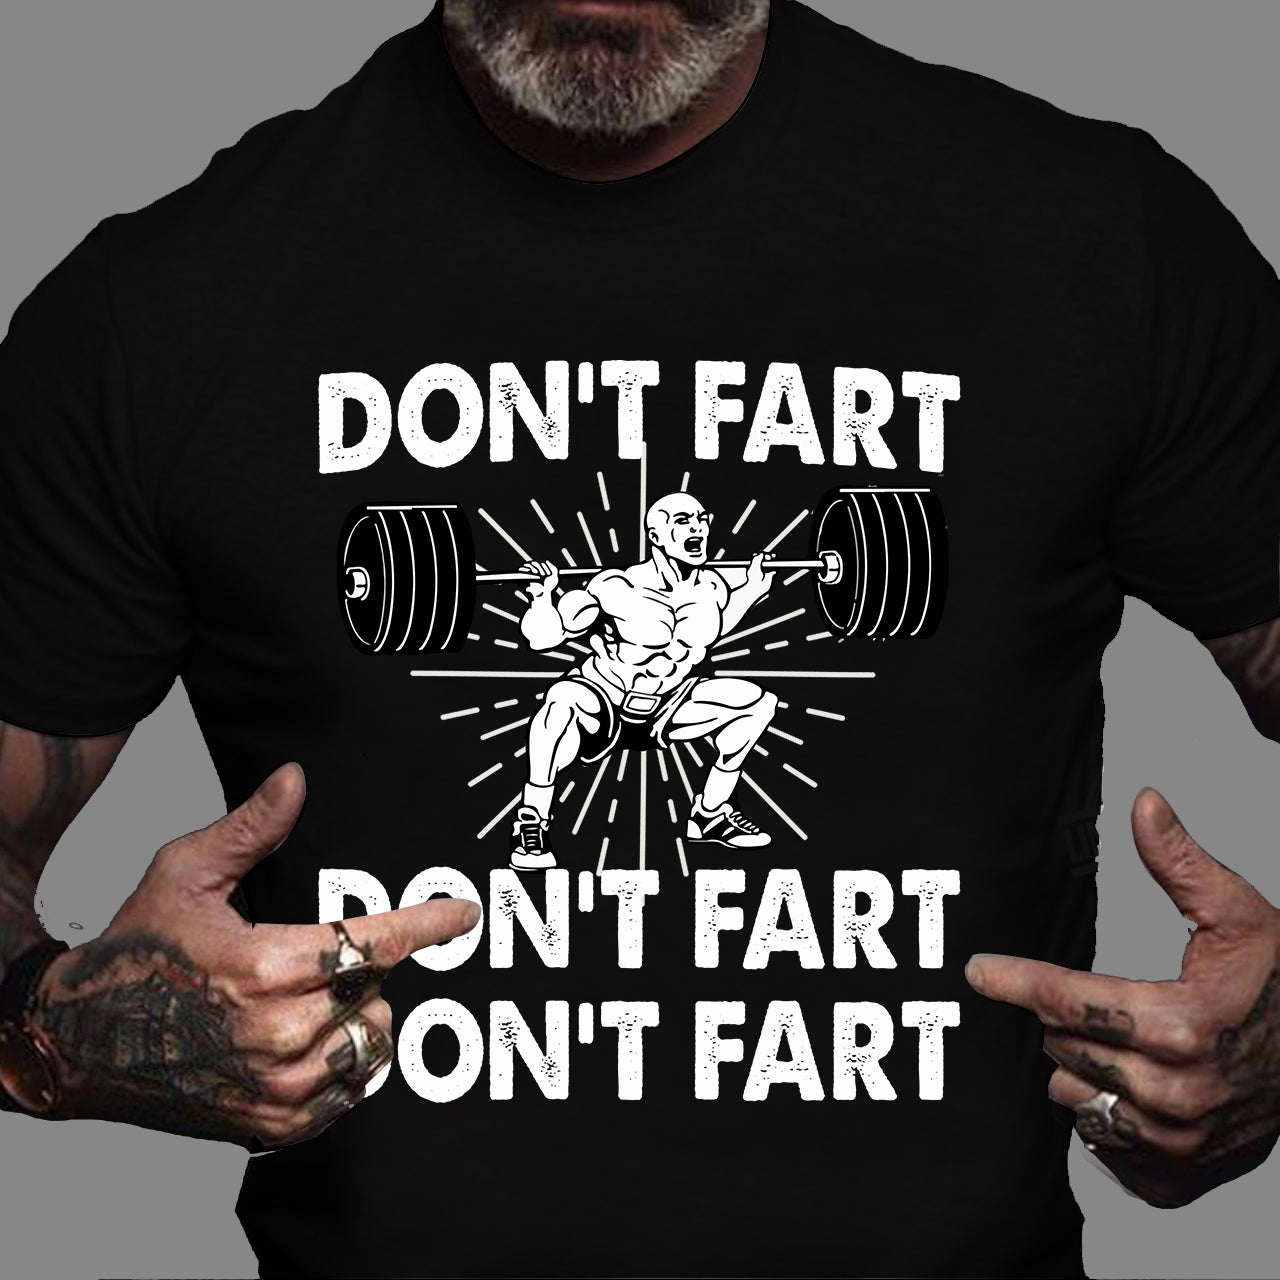 Hilarious Weightlifting Tee - 'Don't Fart' Advice for Lifters 10917